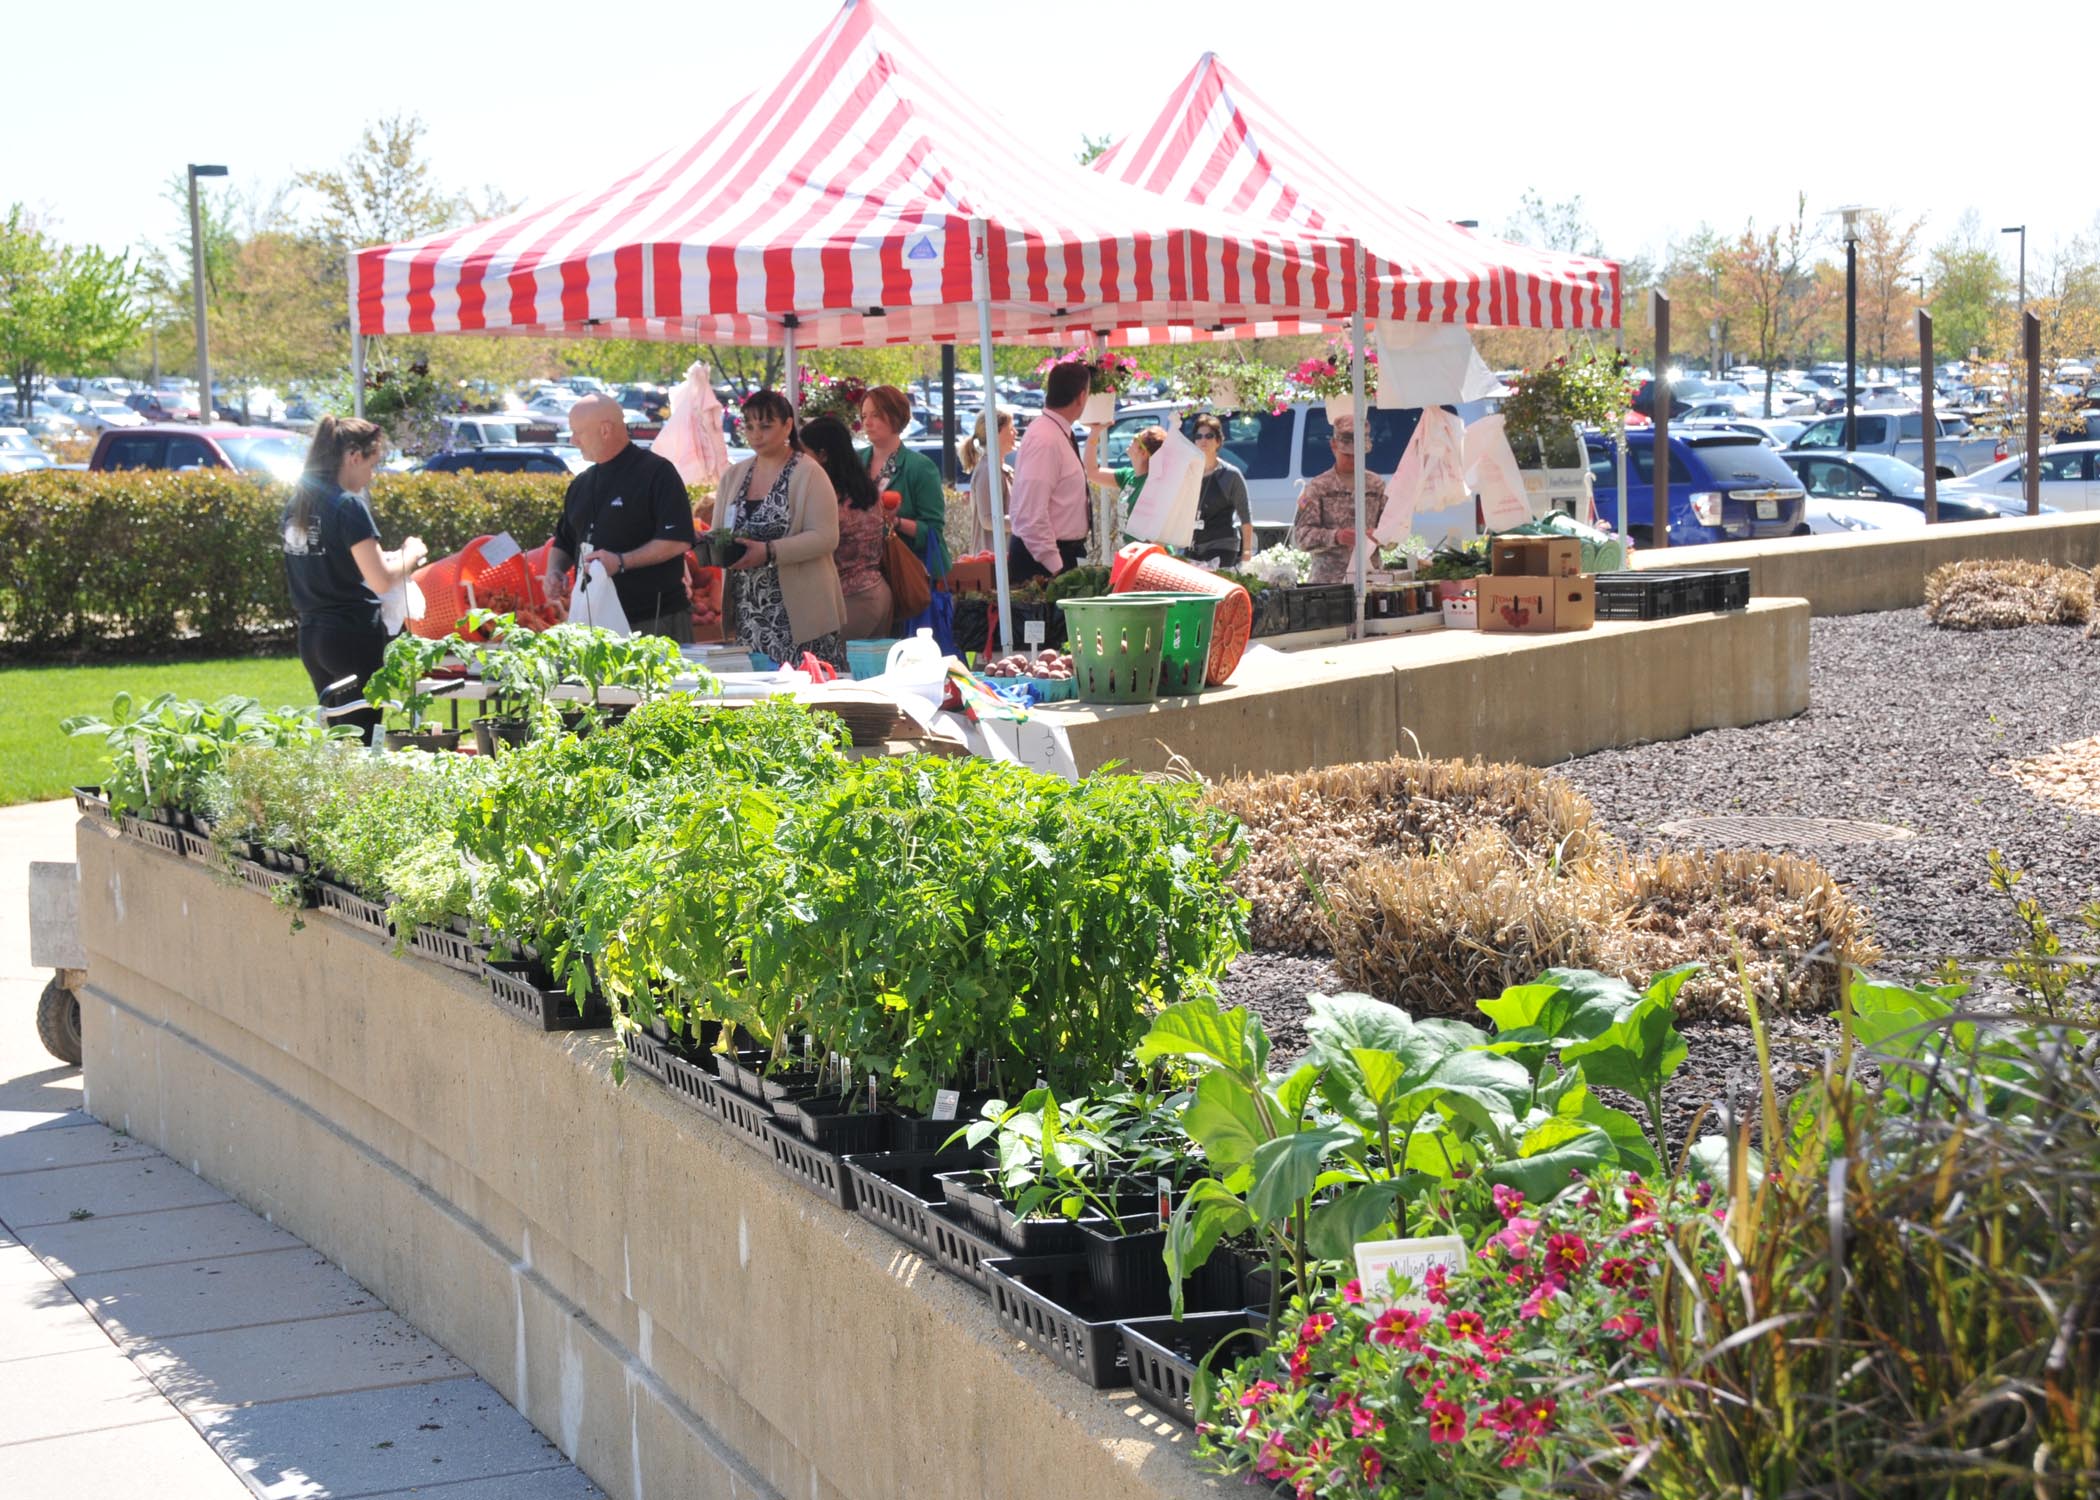 A concrete wall is topped with different types of plants and eople are shopping at the red and white farmer’s market tents in the background